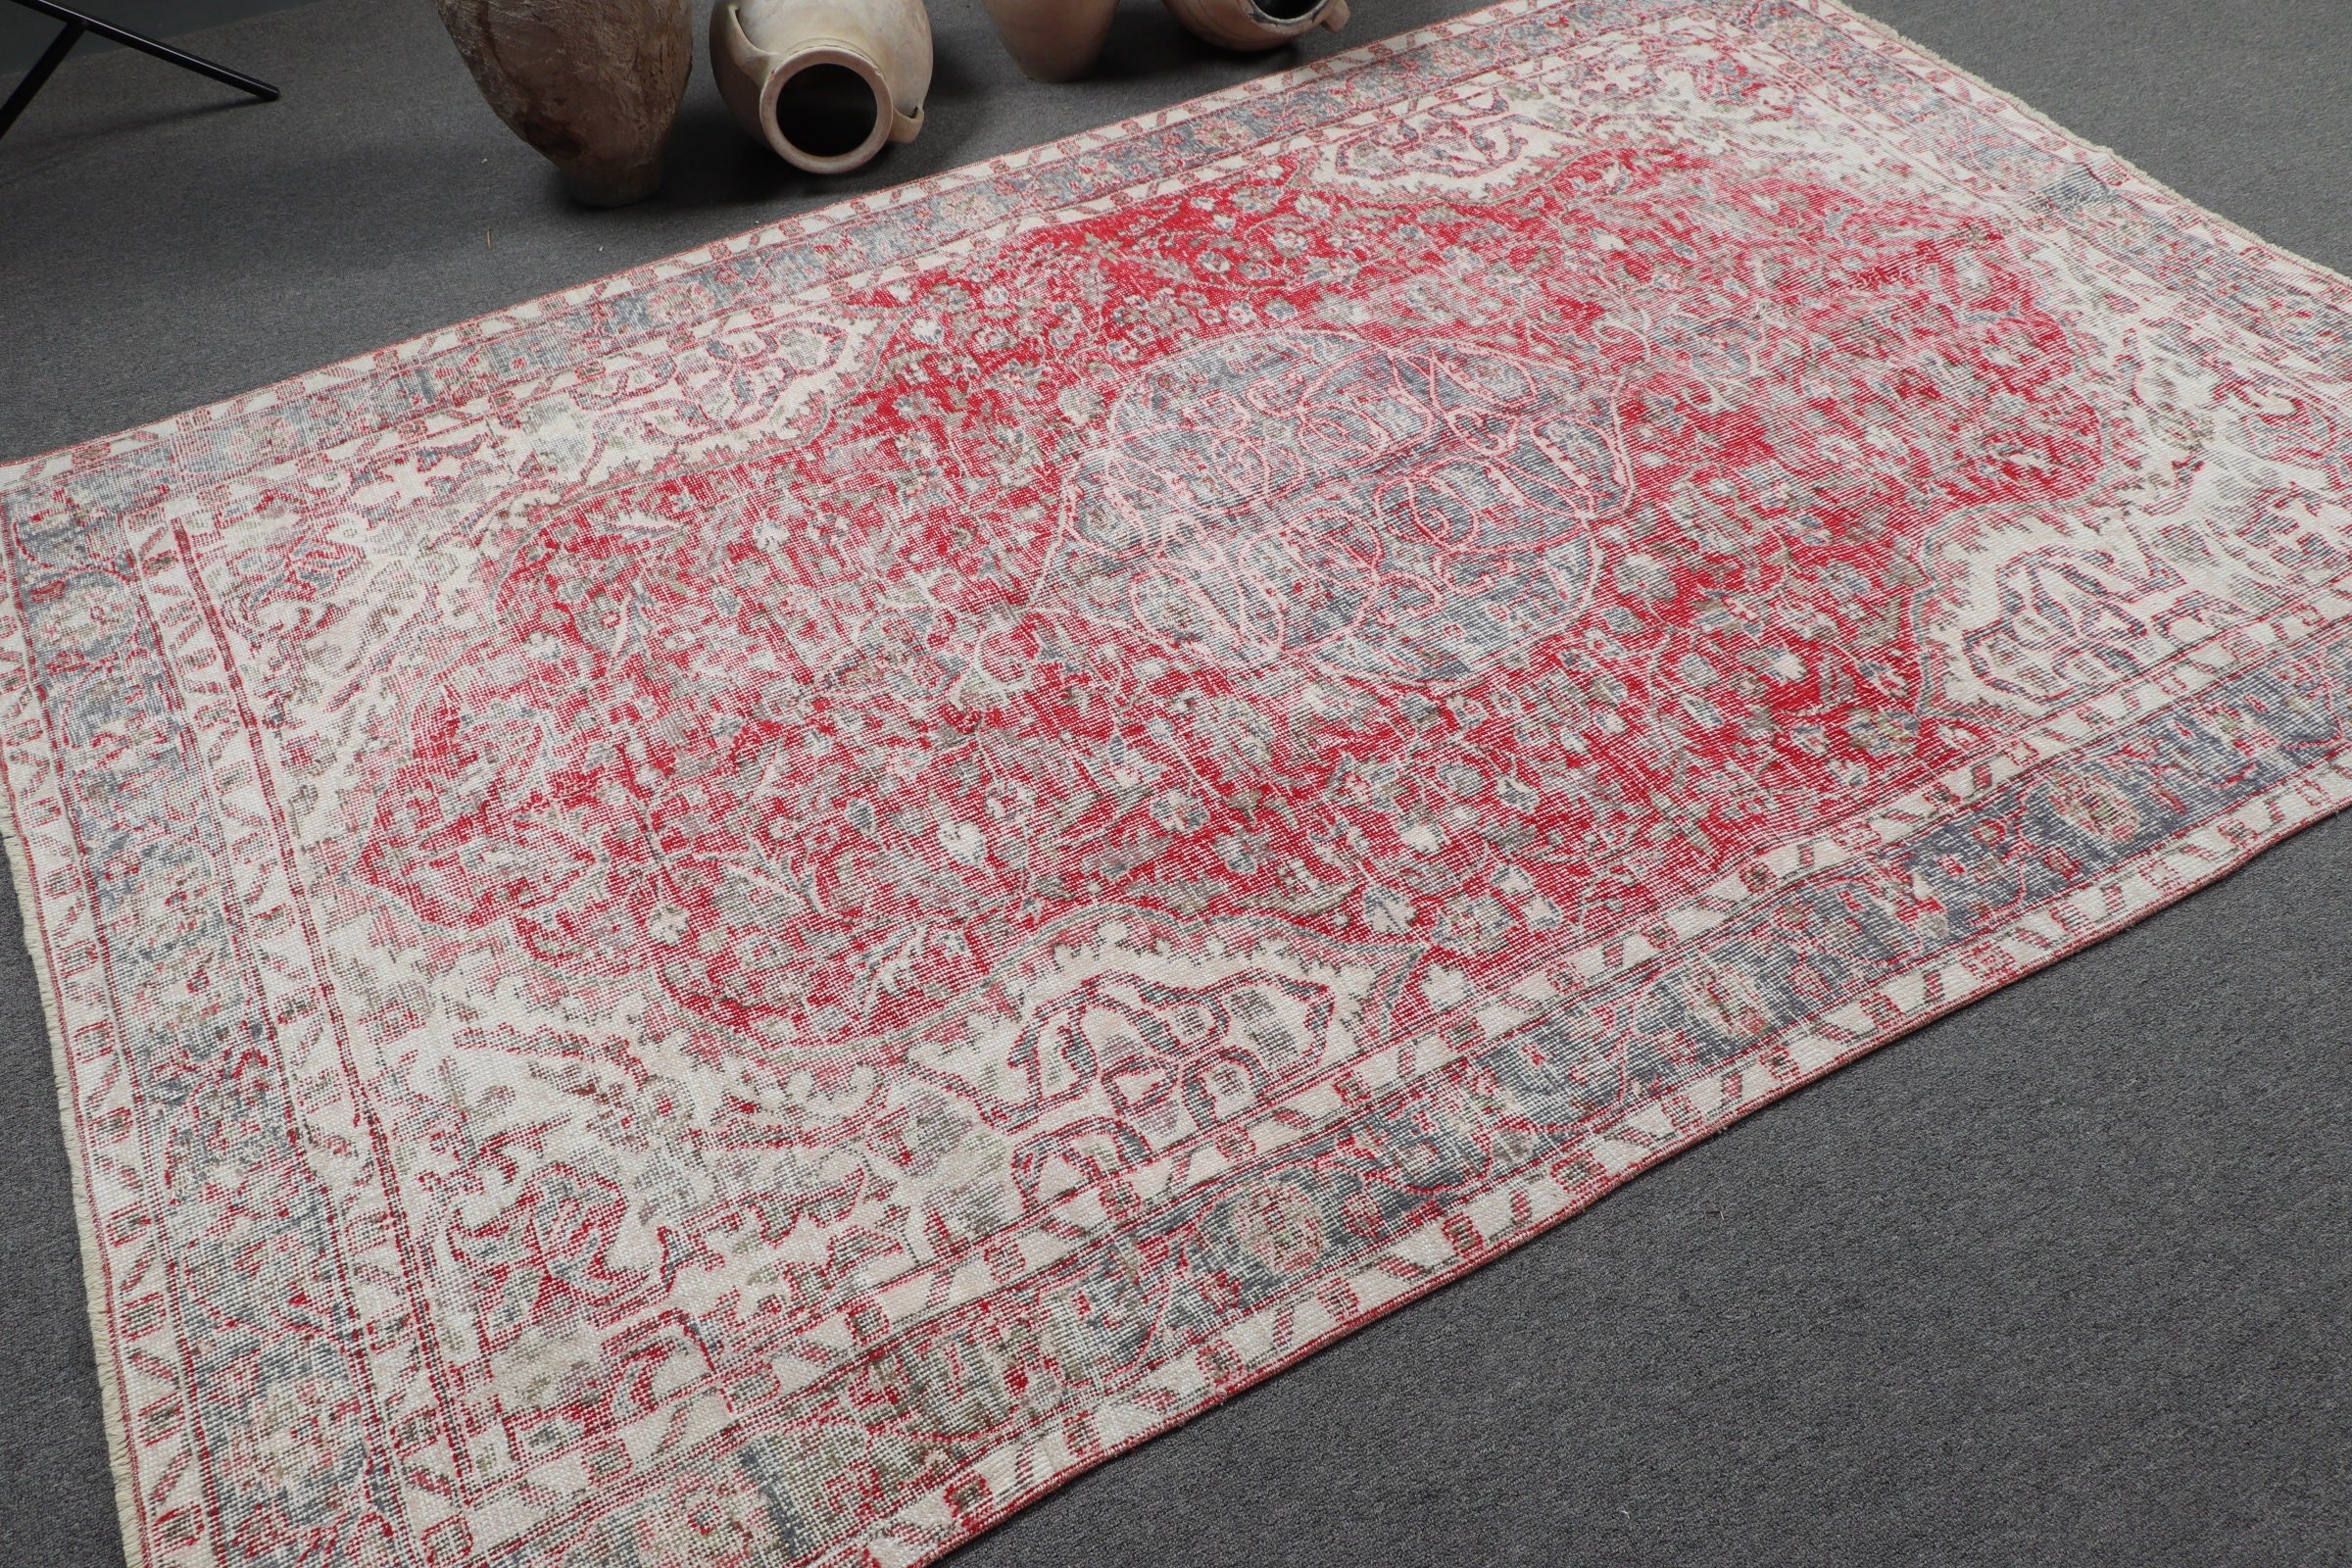 5.5x8.3 ft Large Rugs, Dining Room Rugs, Red Kitchen Rug, Turkish Rugs, Moroccan Rugs, Vintage Rugs, Antique Rugs, Bedroom Rug, Bright Rug